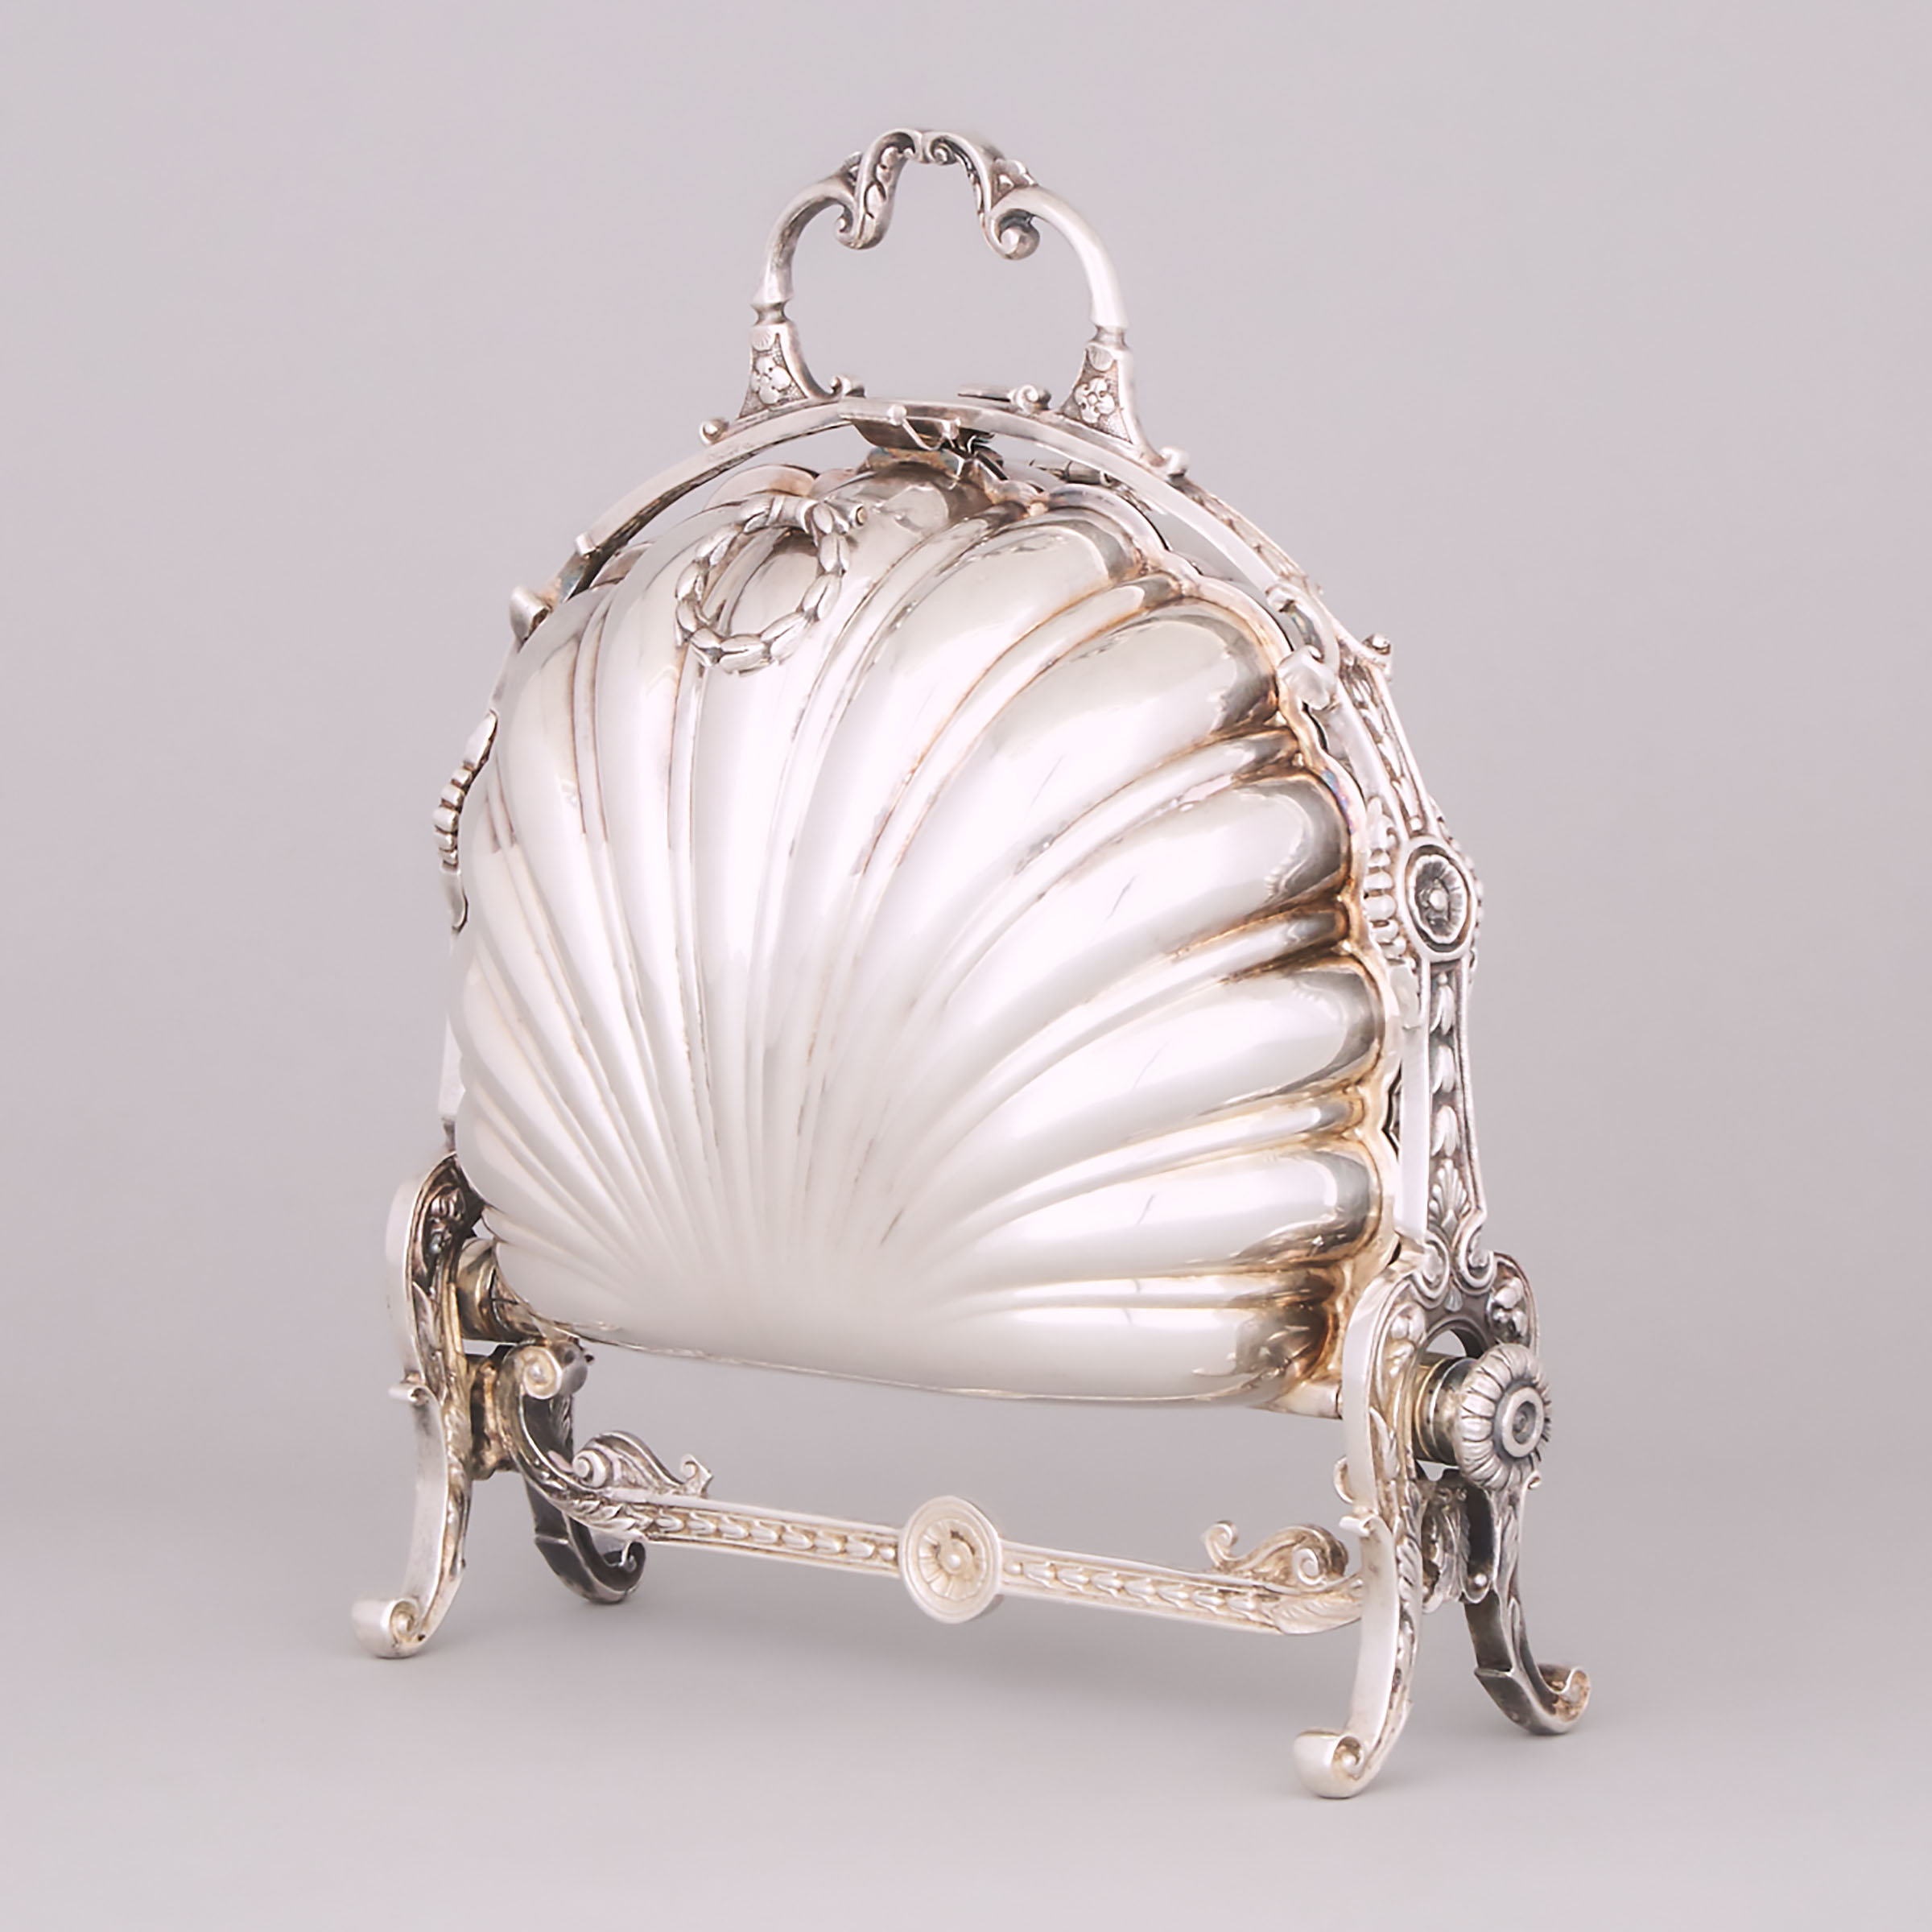 Edwardian Silver Plated Shell Breakfast Dish, early 20th century